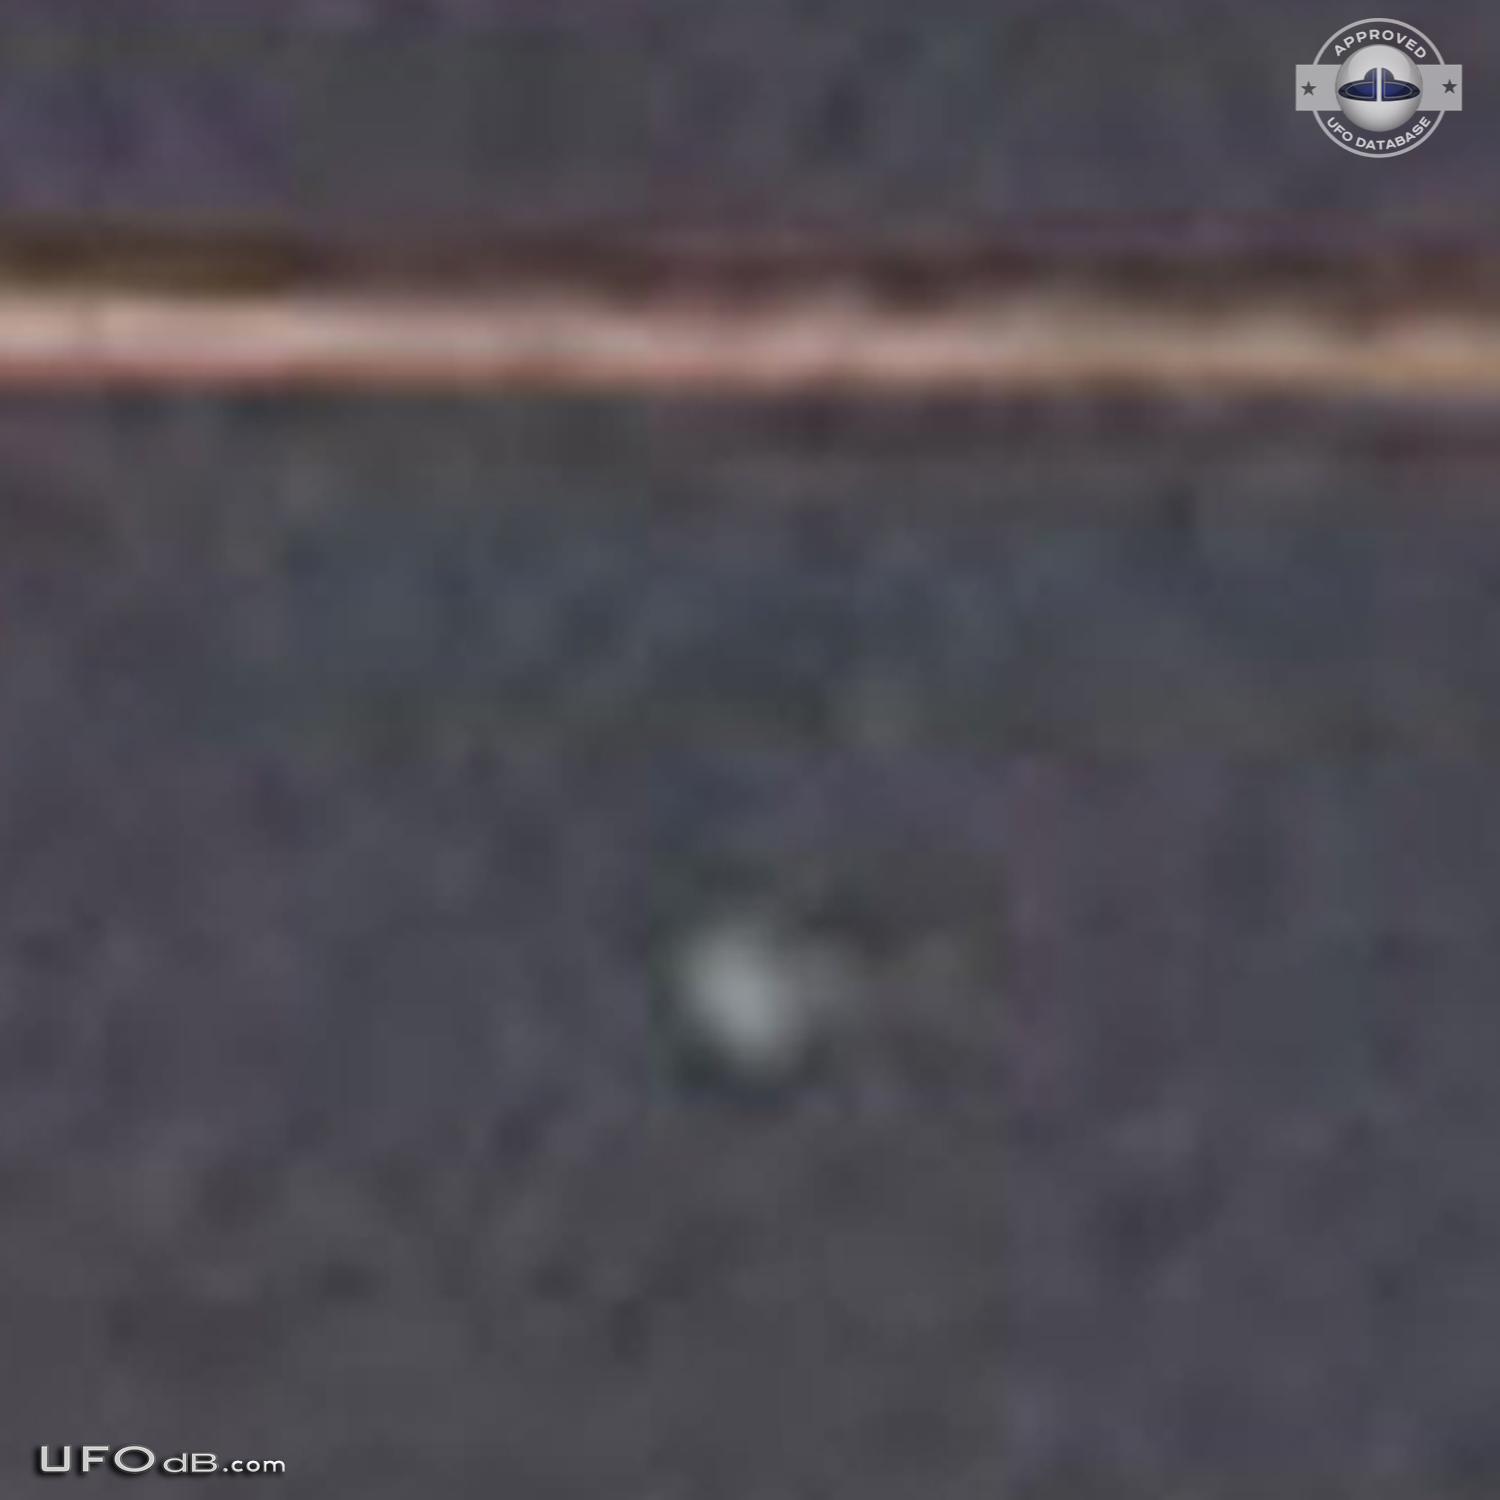 Photos of vaportrail in sunrise get UFO near plane in Evant Texas 2012 UFO Picture #519-5